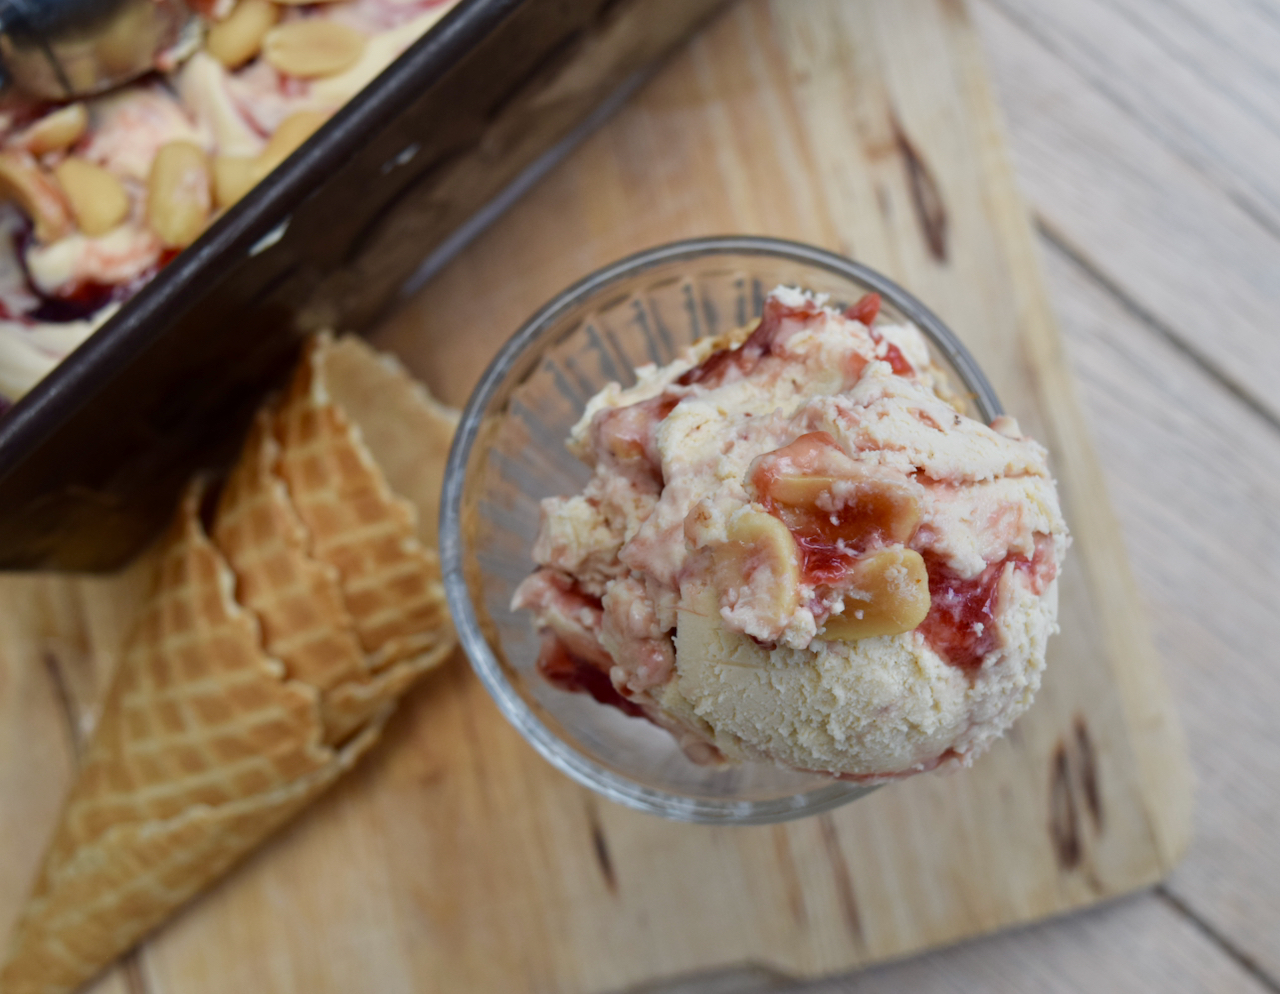 PB&J Ice Cream recipe from Lucy Loves Food Blog